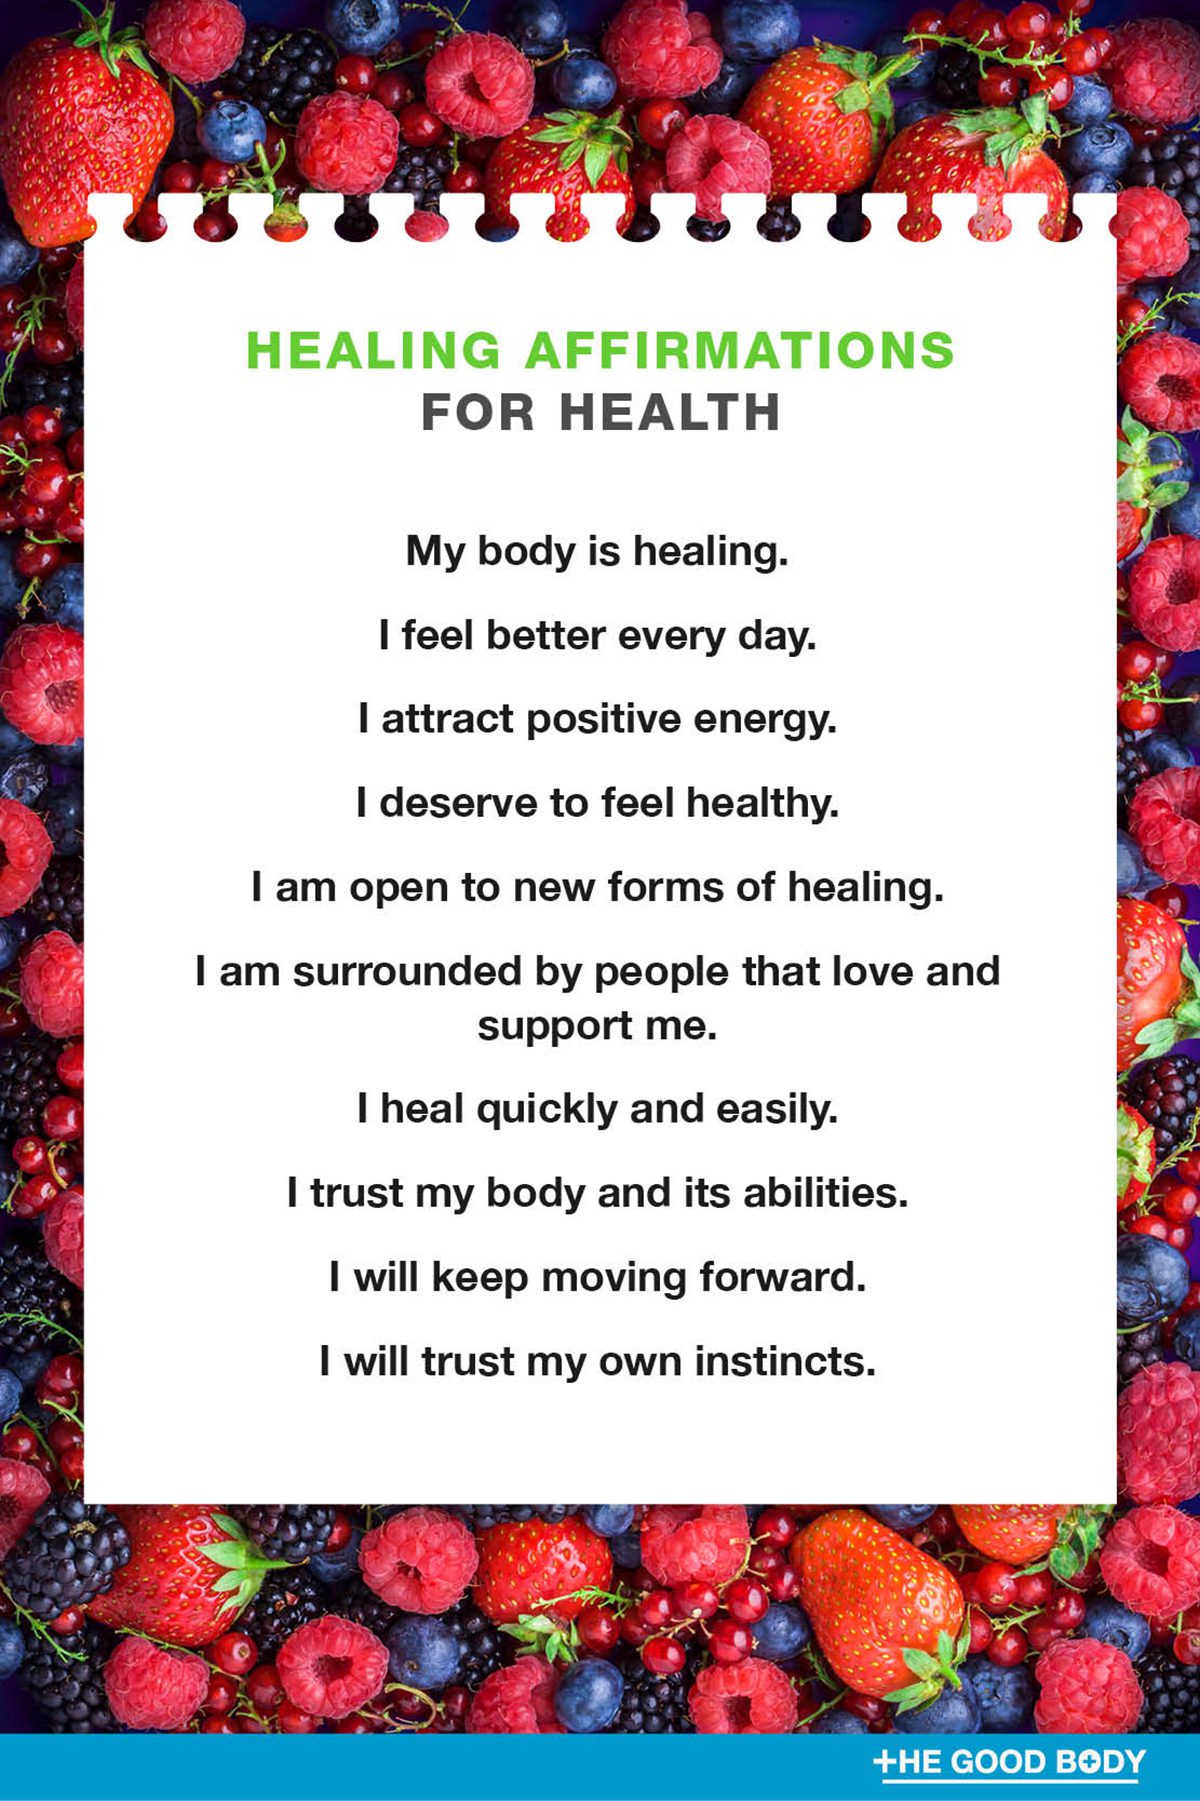 10 Healing Affirmations for Health on White Note Paper Set Against Berries Background